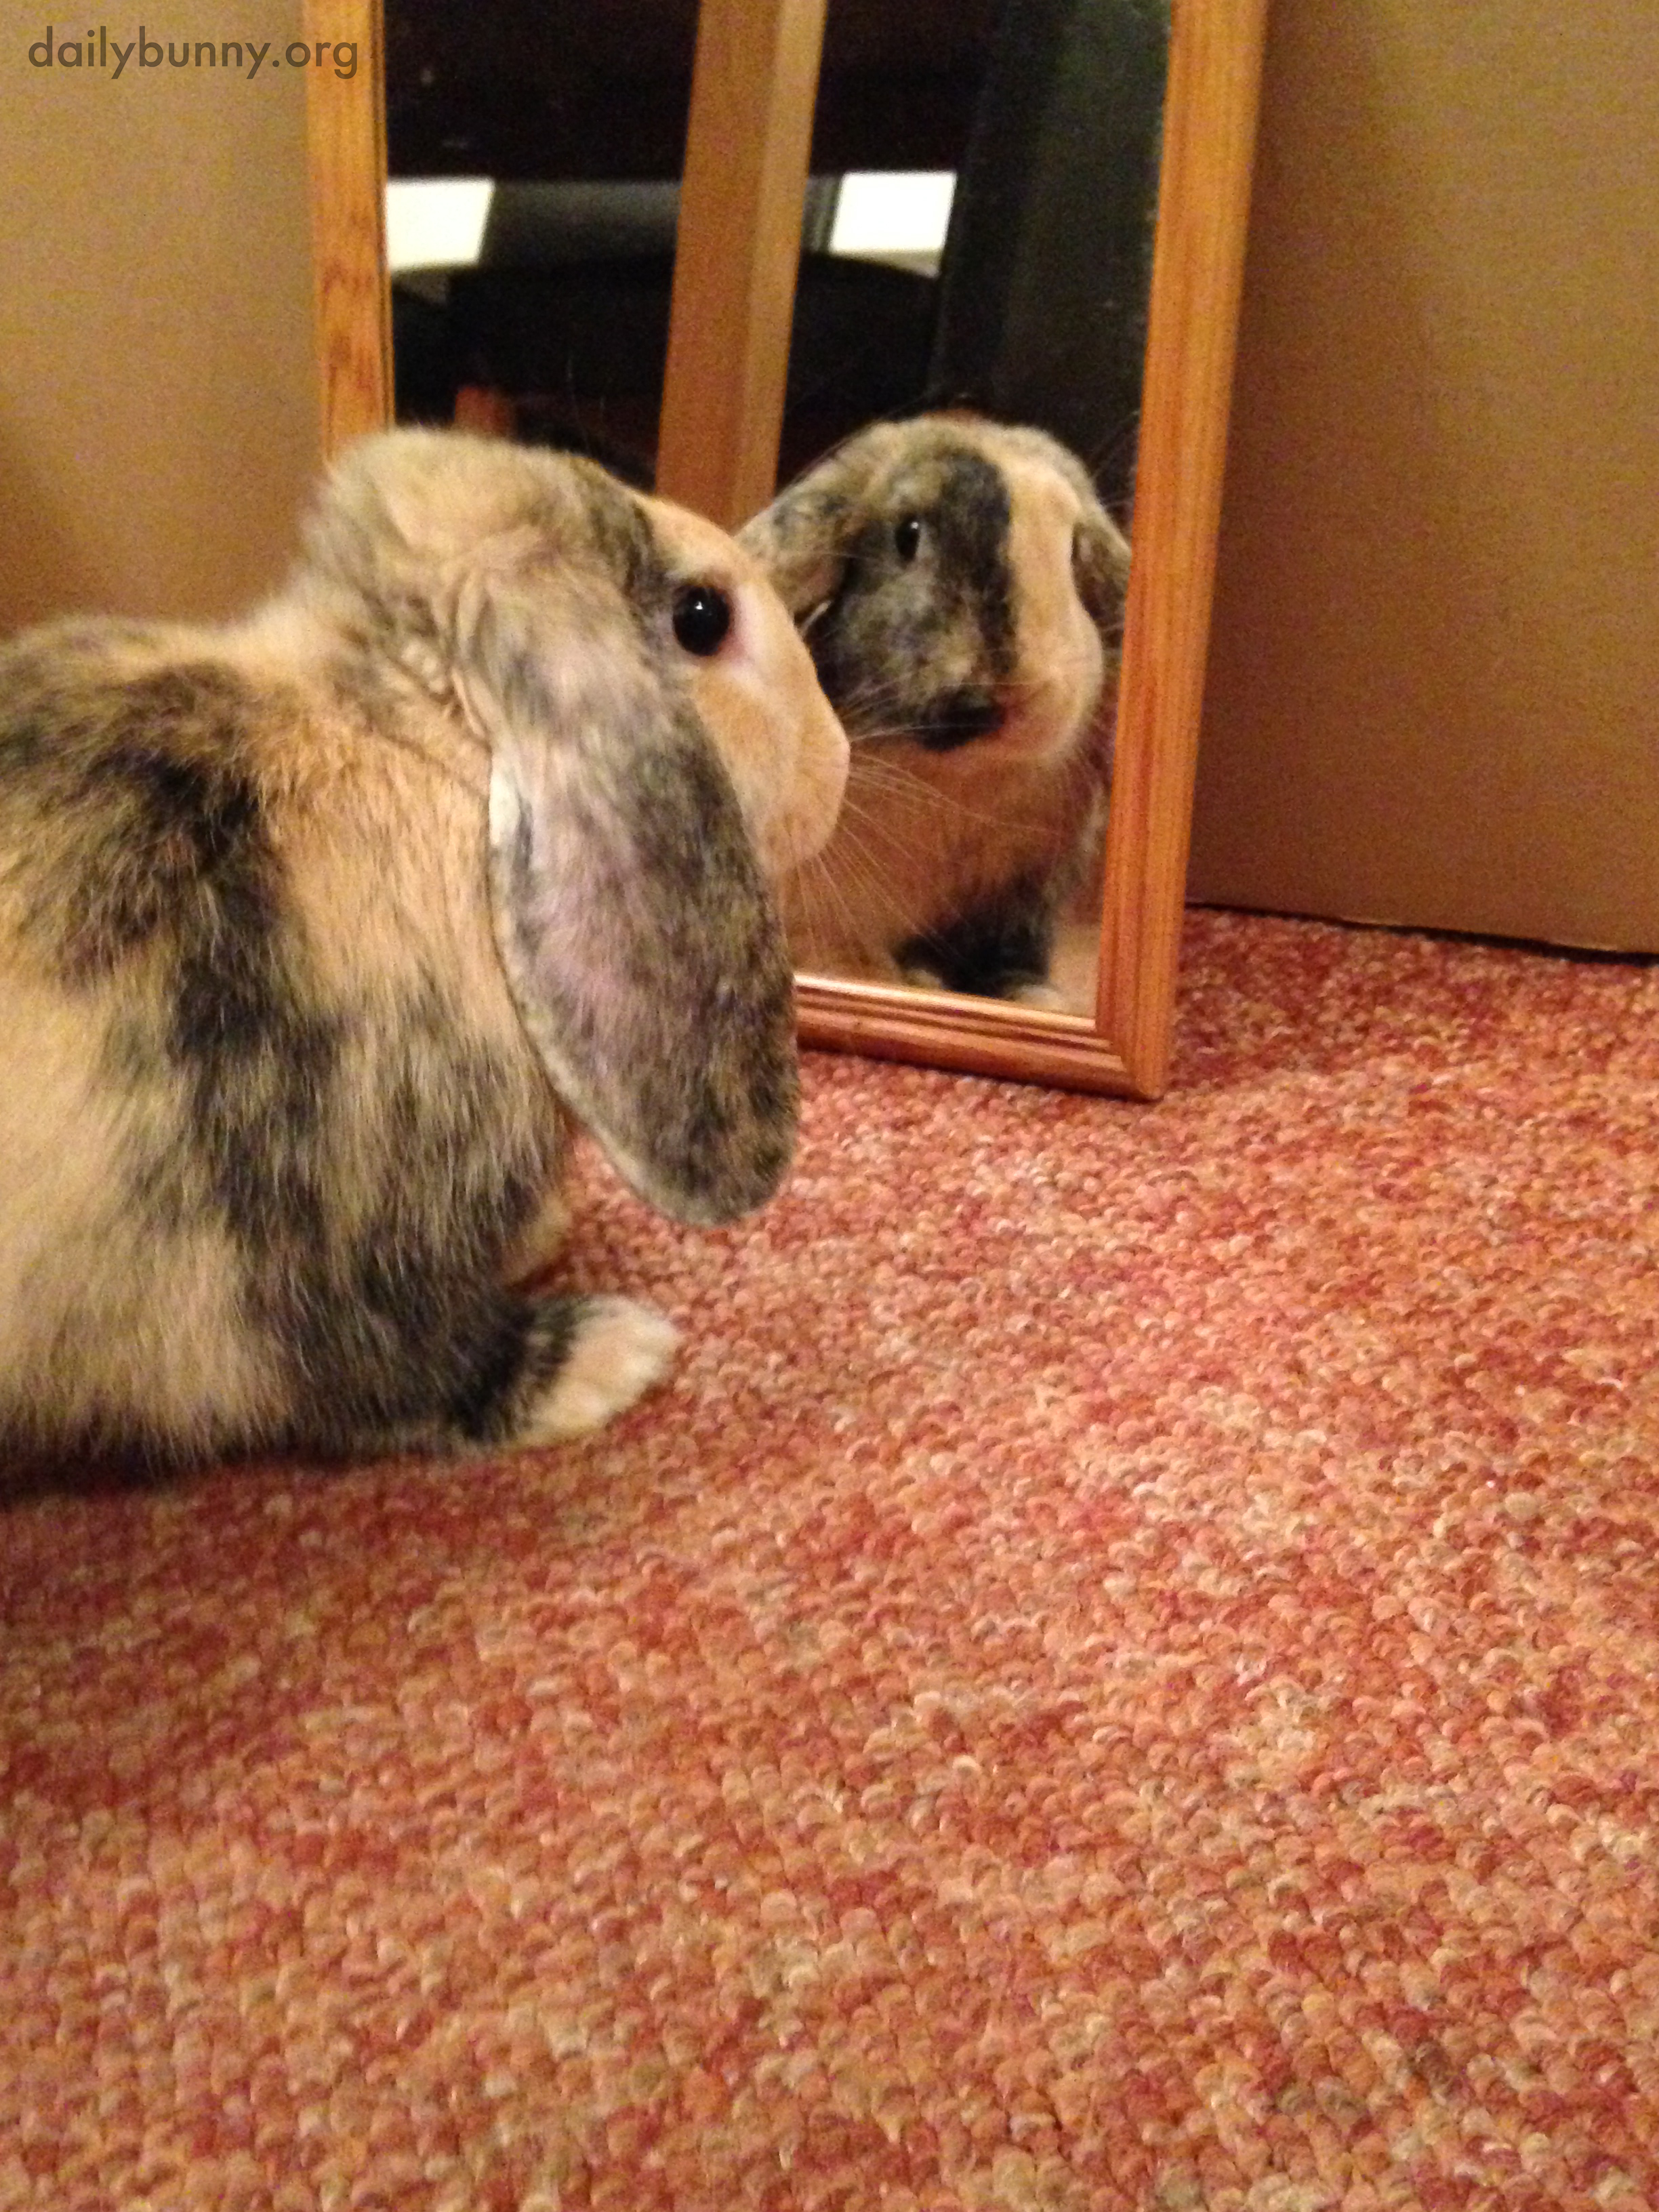 Oh My, Who Is That Beautiful Bunny Back Looking at Me?